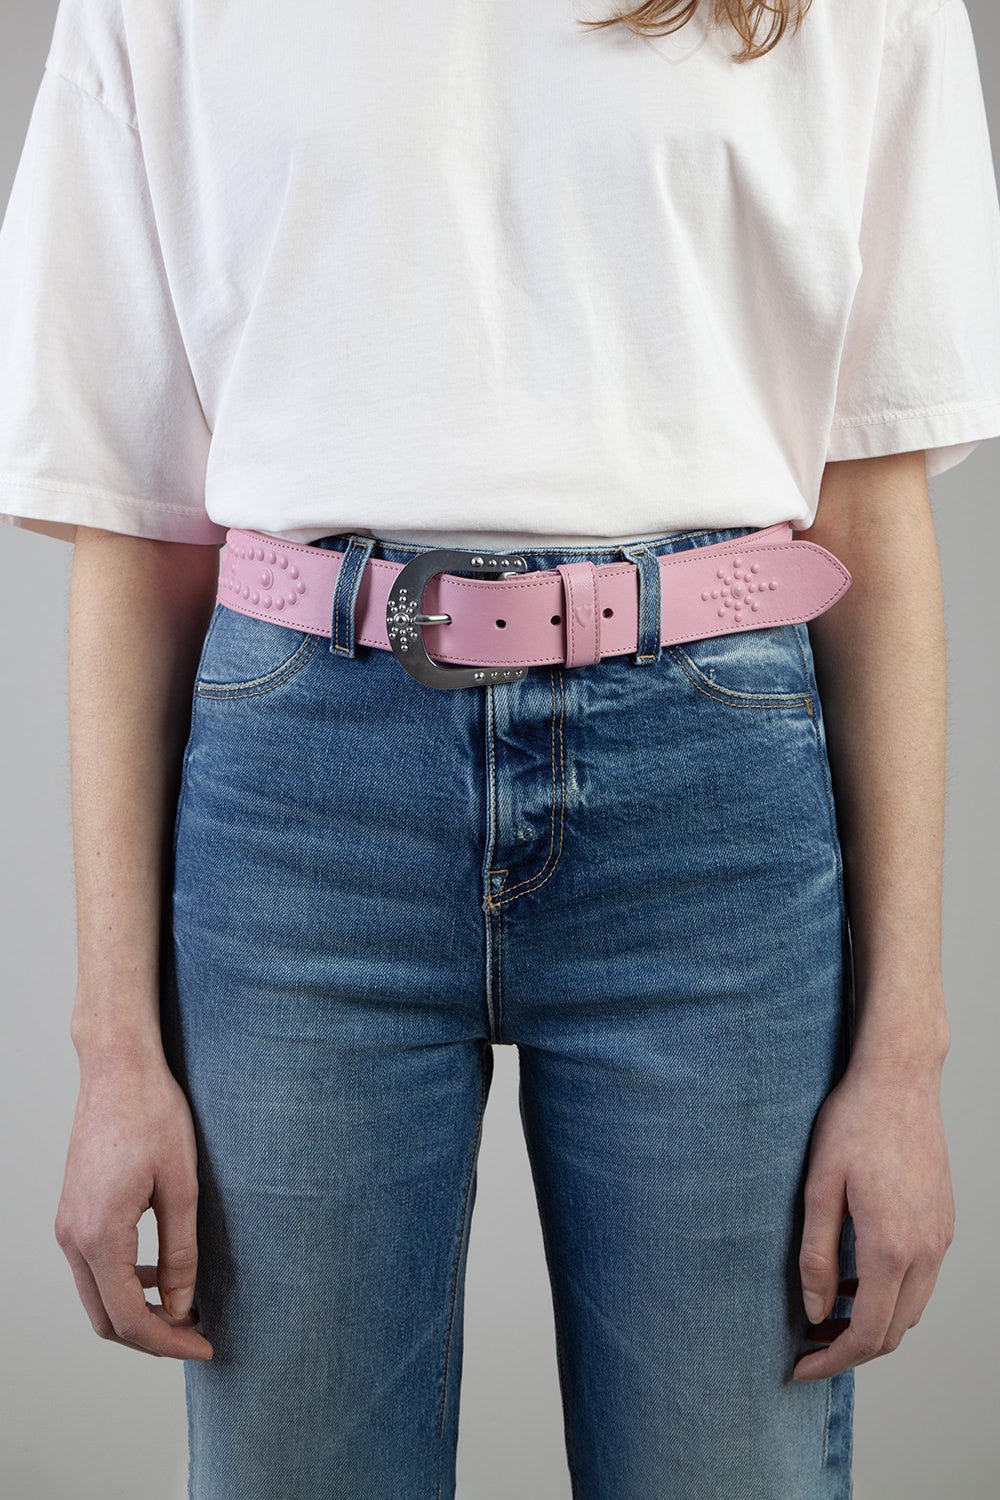 MIRAGE BELT Pink leather belt, zama buckle, with HTC shield logo rivet. Height: 4 cm. Made in Italy. HTC LOS ANGELES